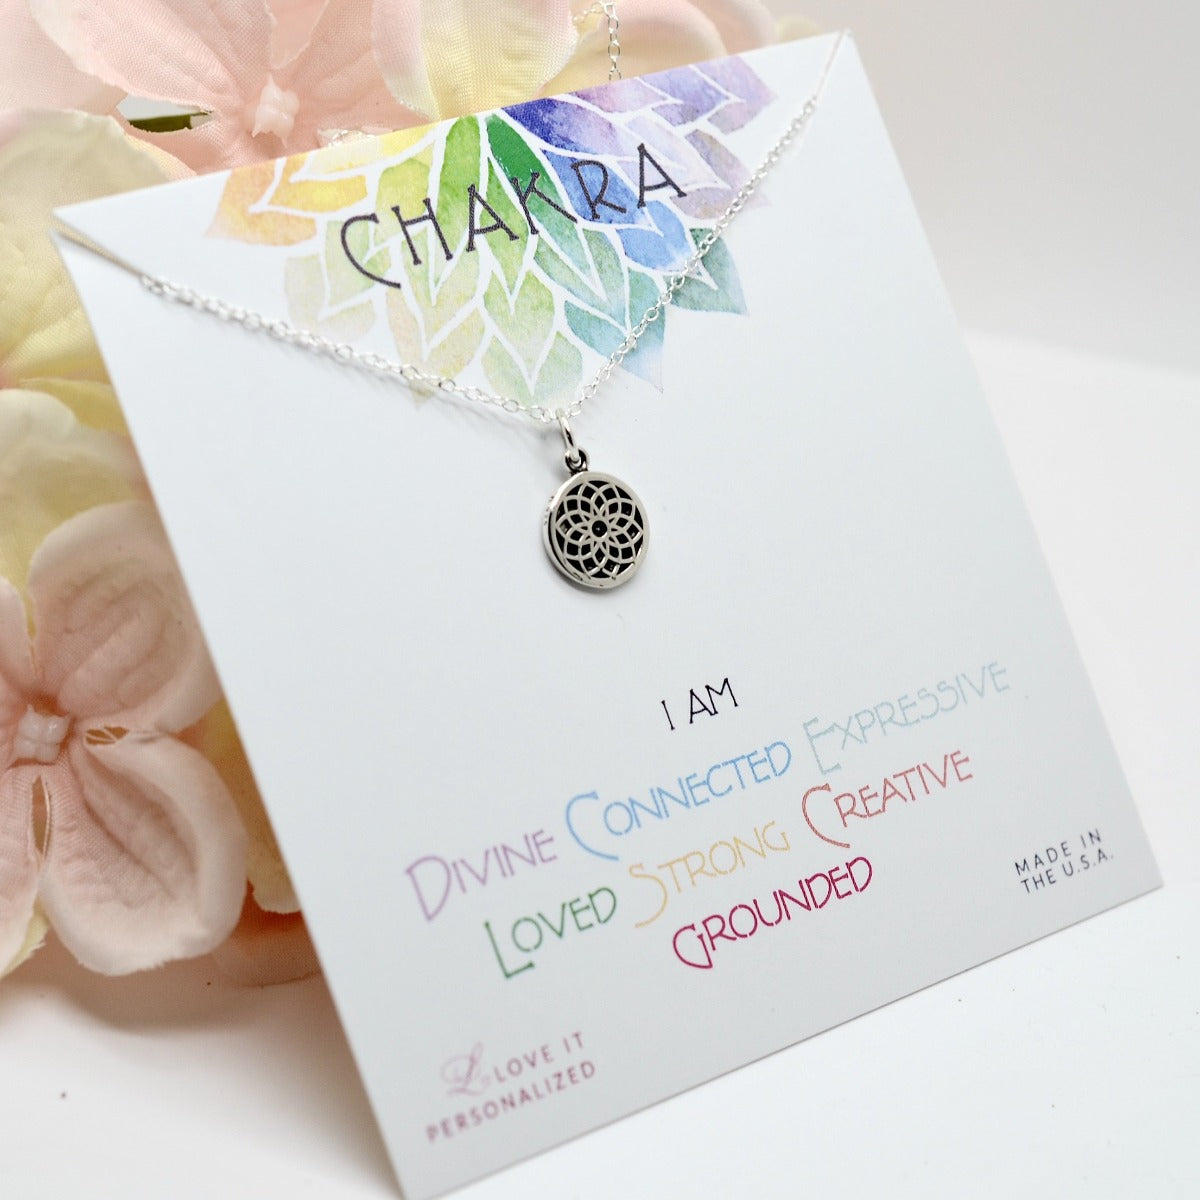 Crown Chakra Necklace - Love It Personalized